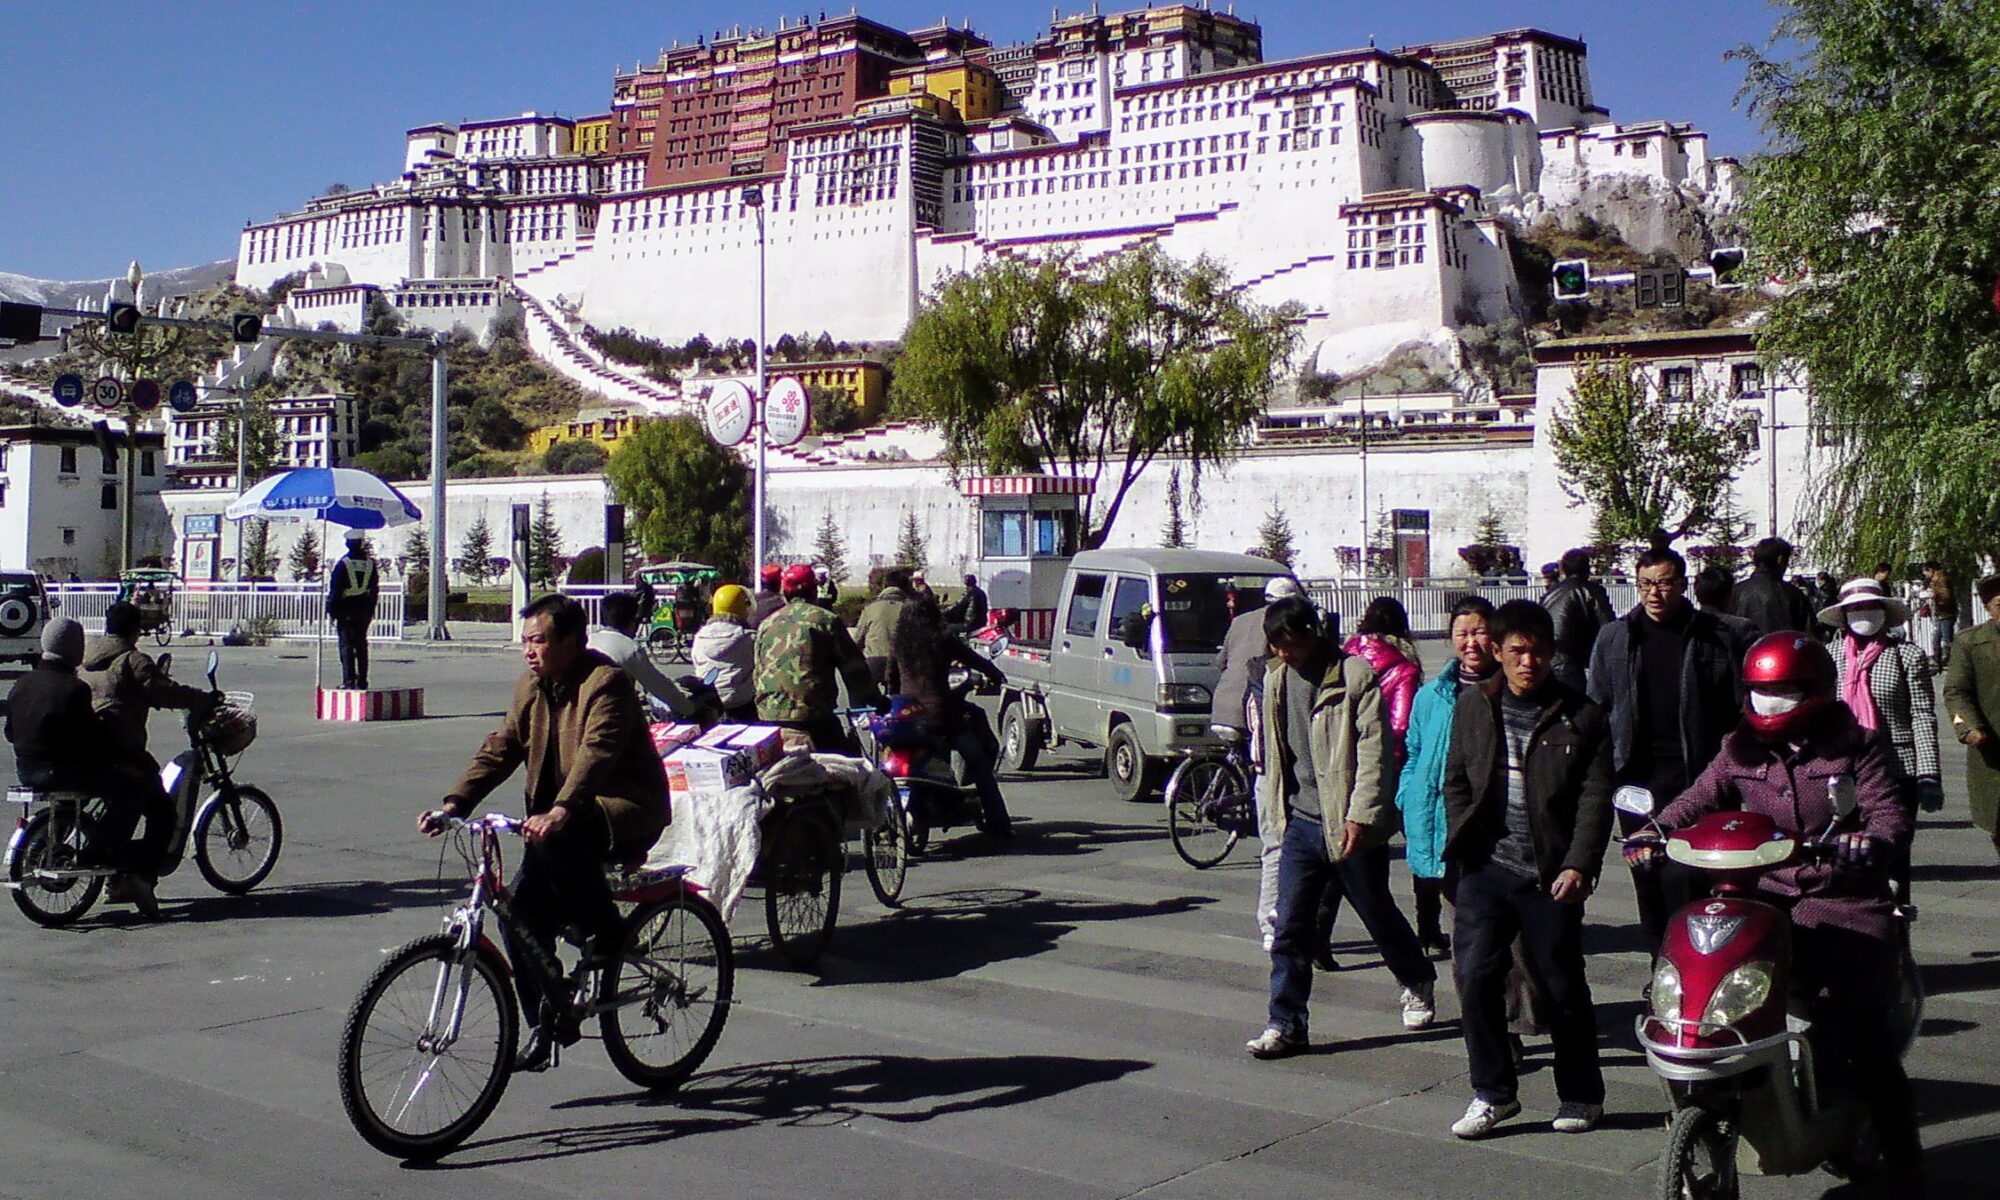 Crowds crossing street in front of the Potala Palace - Lhasa, Tibet- November 2008